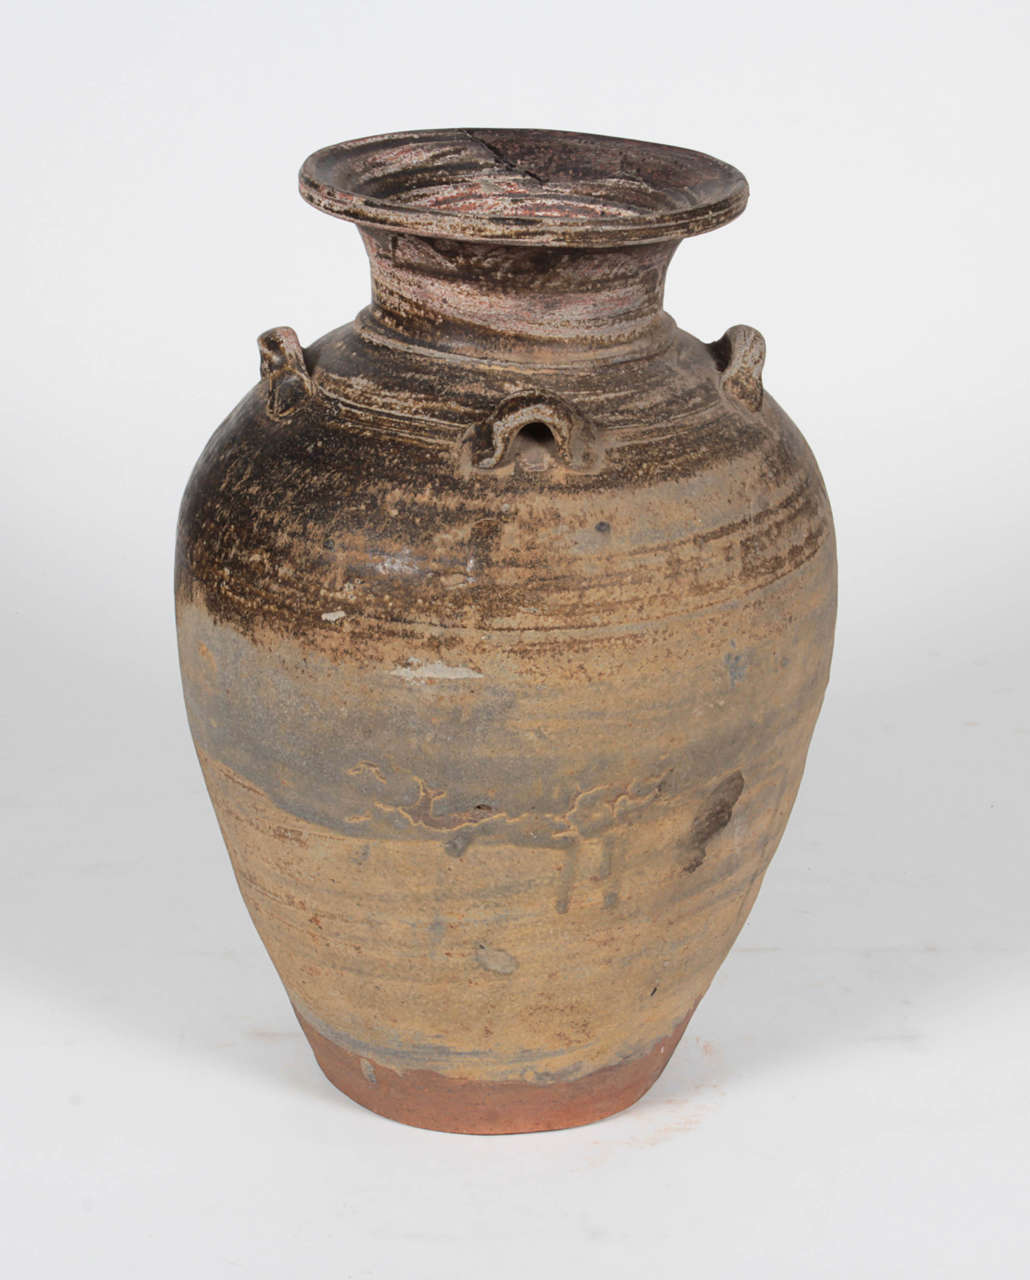 Antique ceramic urn from Indonesia. Personally selected by Donna Karan for her Urban Zen brand.